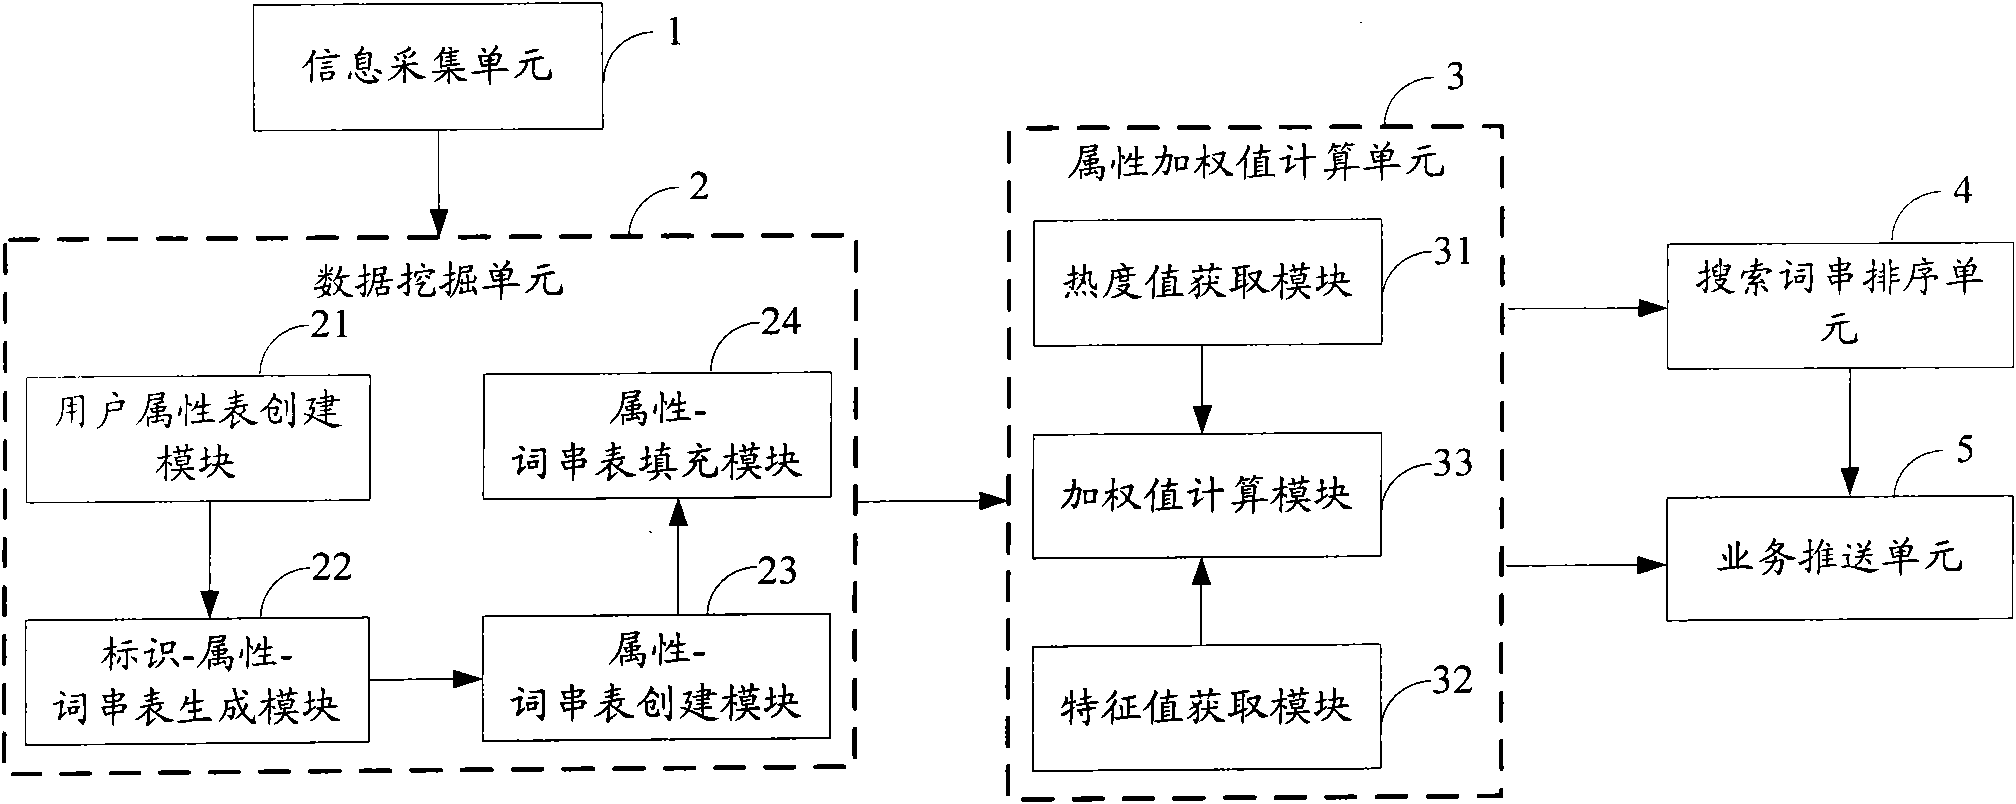 Method, device and search engine for sequencing searching keywords